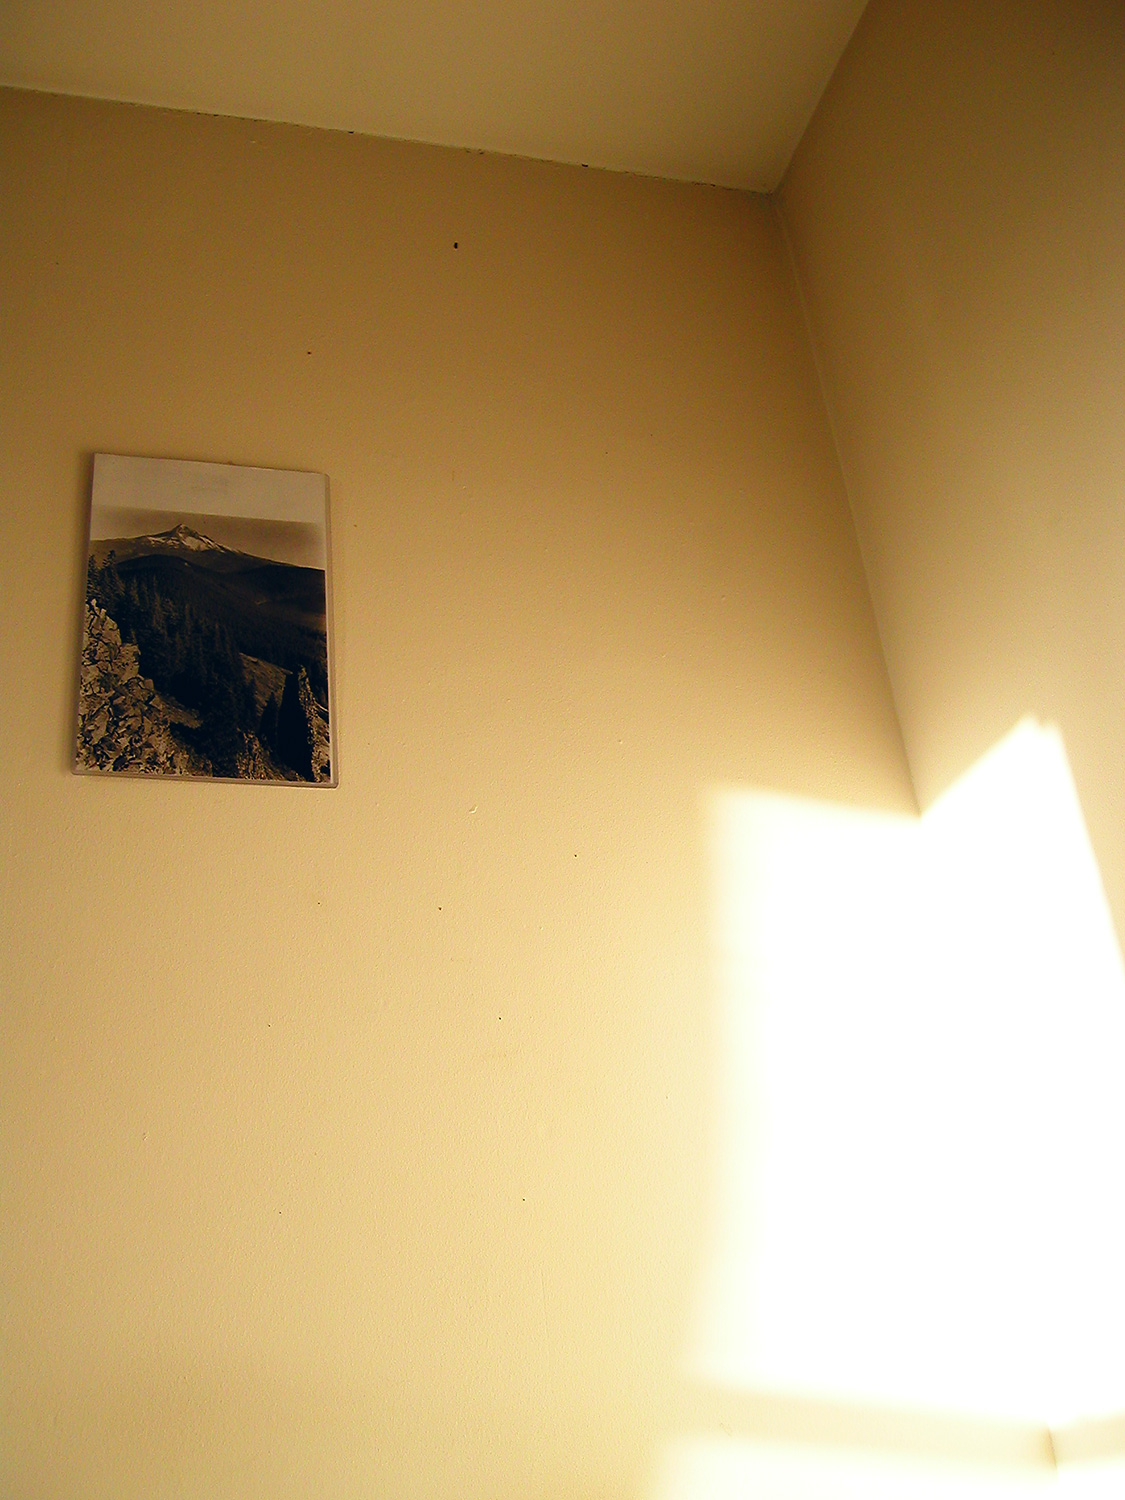 It is a corner, with shadow and light.